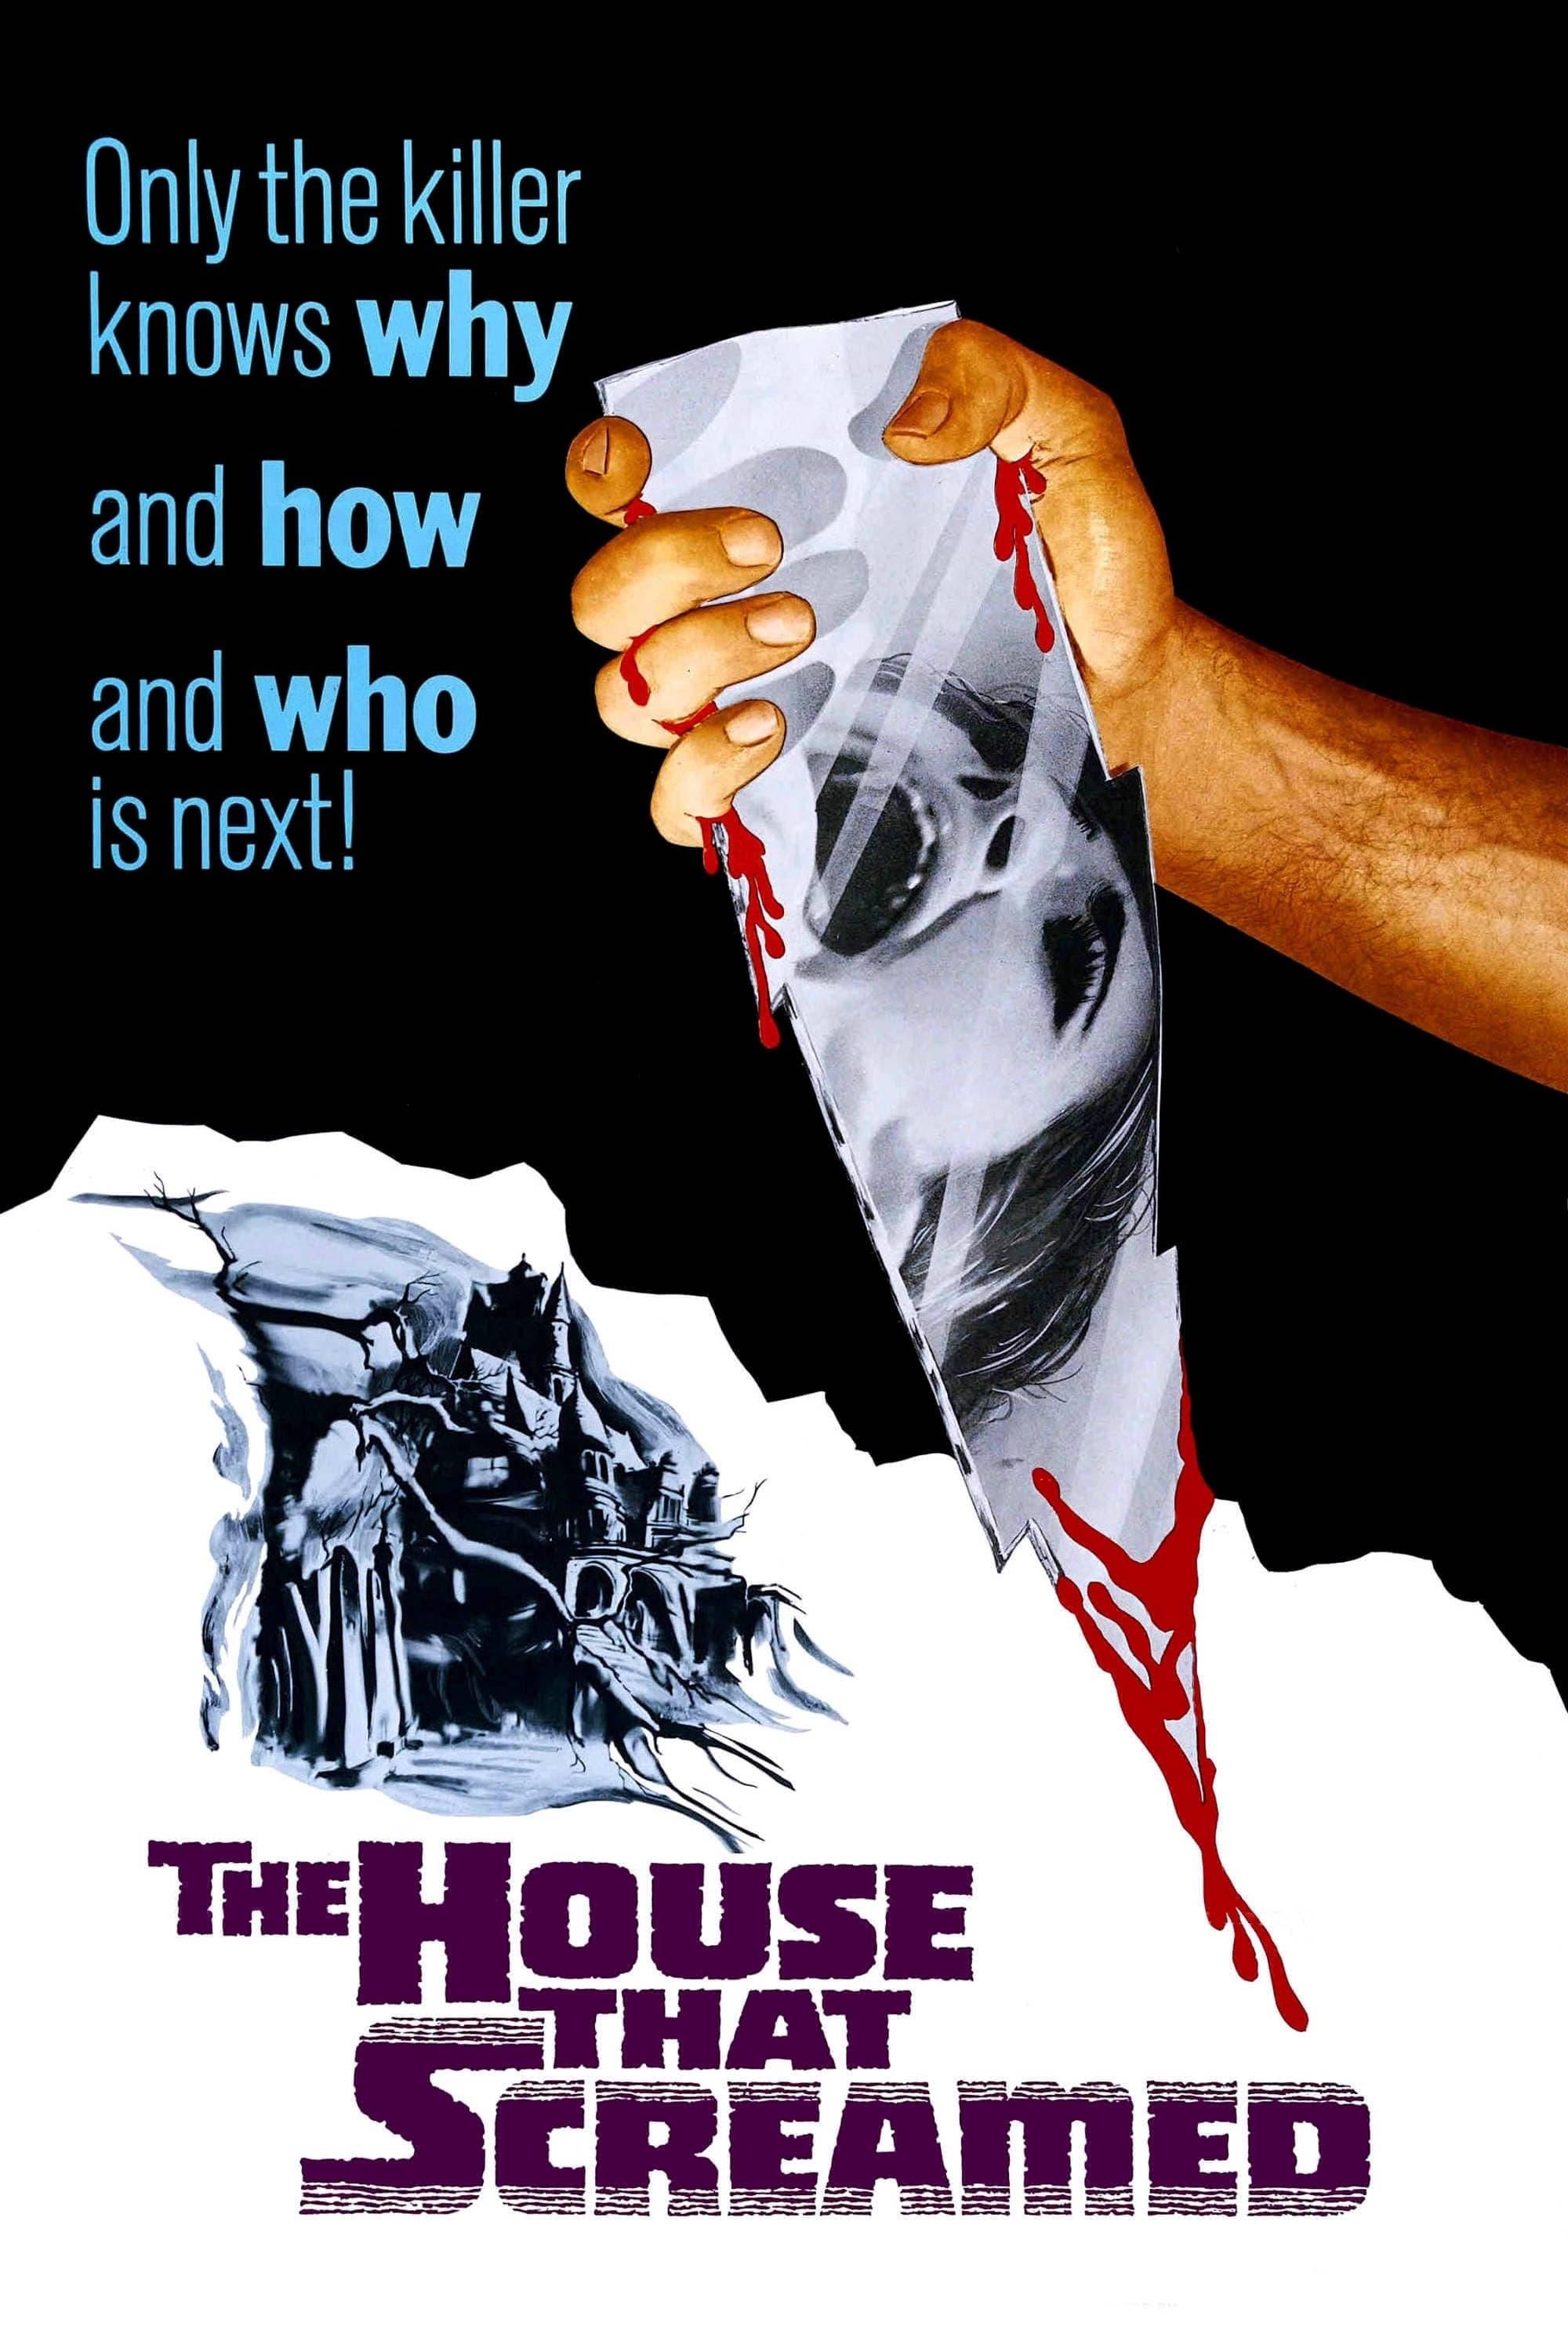 The House That Screamed poster